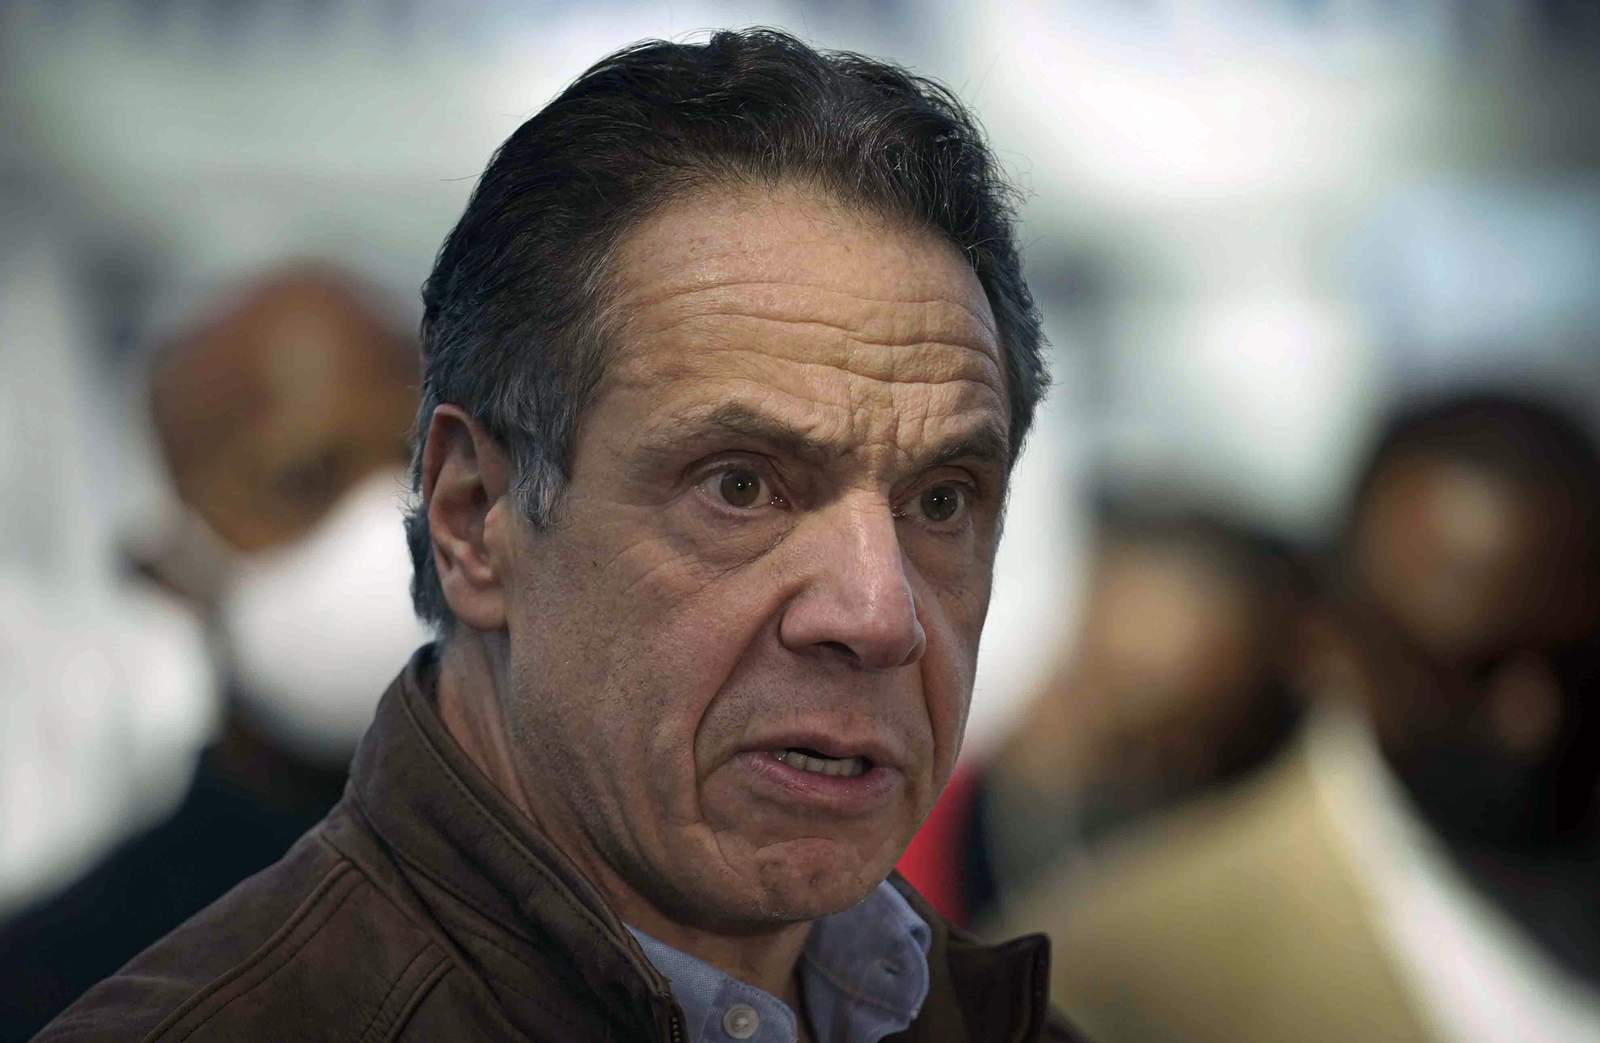 Report: Cuomo groped female aide in governor's residence